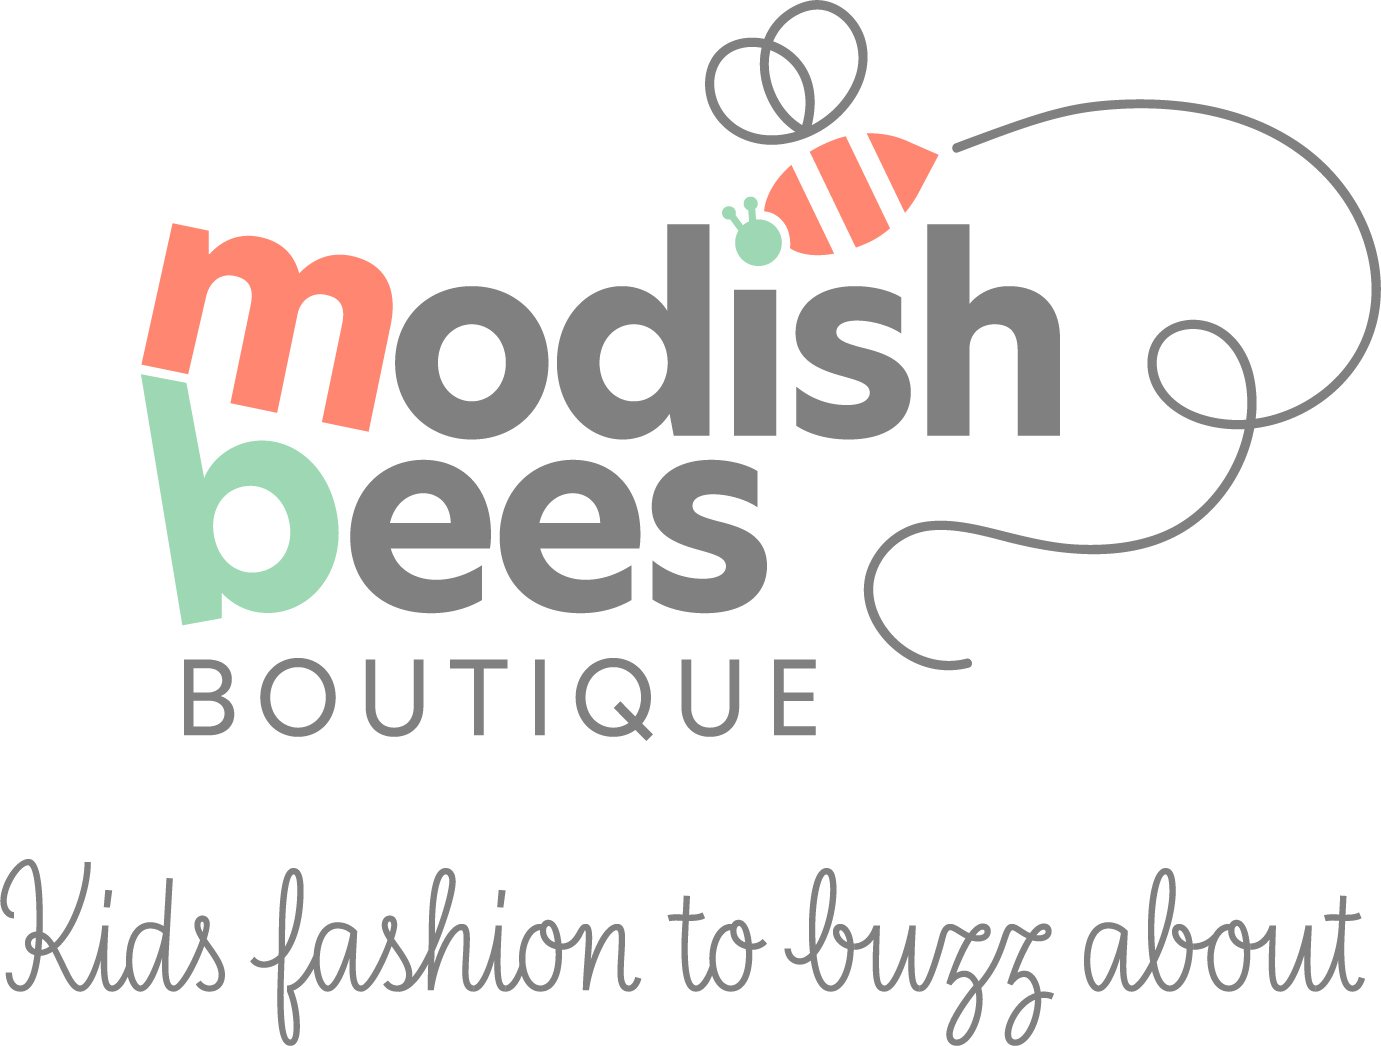 Modish Bees Boutique Kids Fashion to buzz about